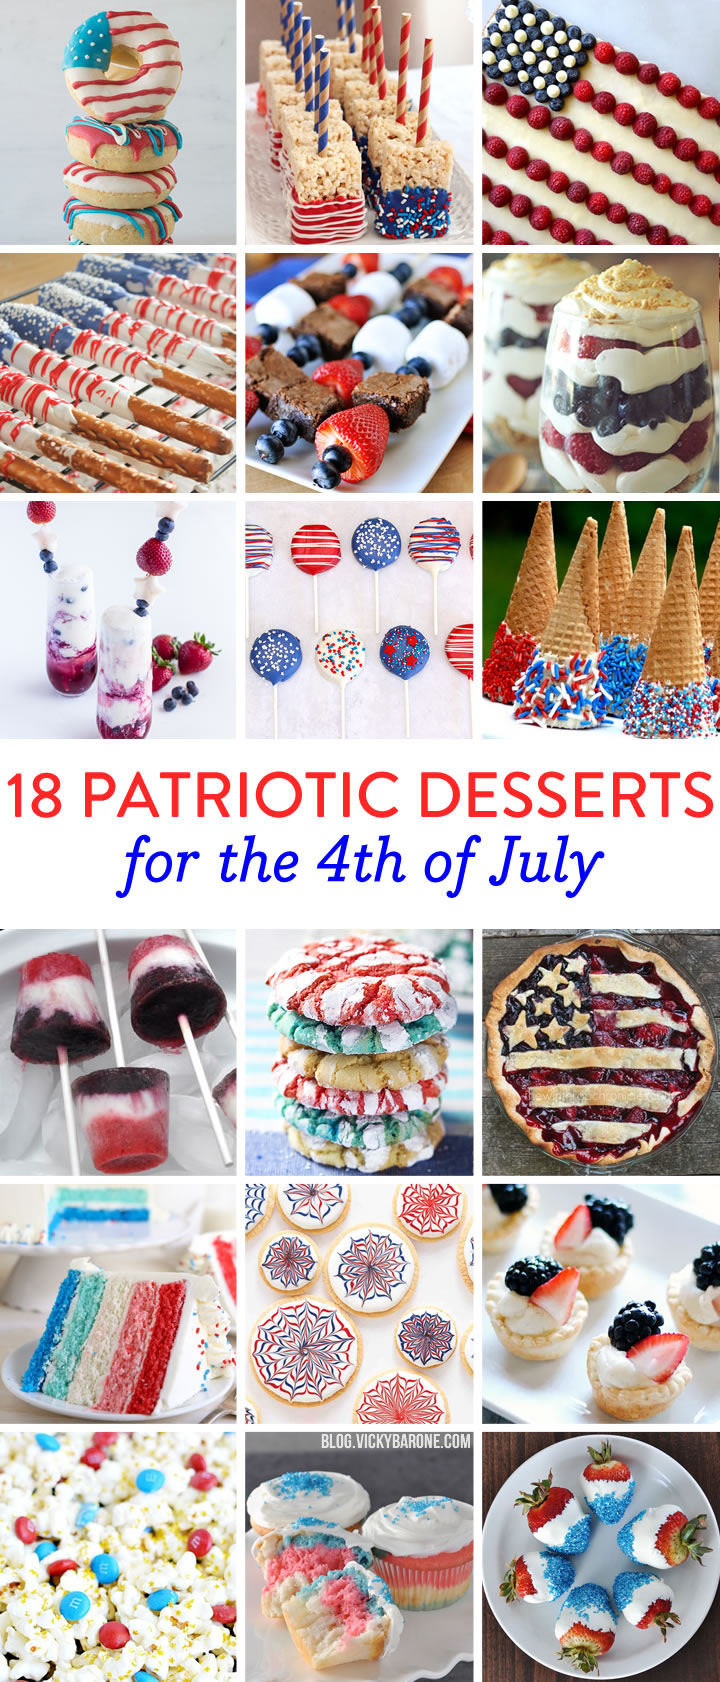 18 Patriotic Desserts for the 4th of July | Vicky Barone